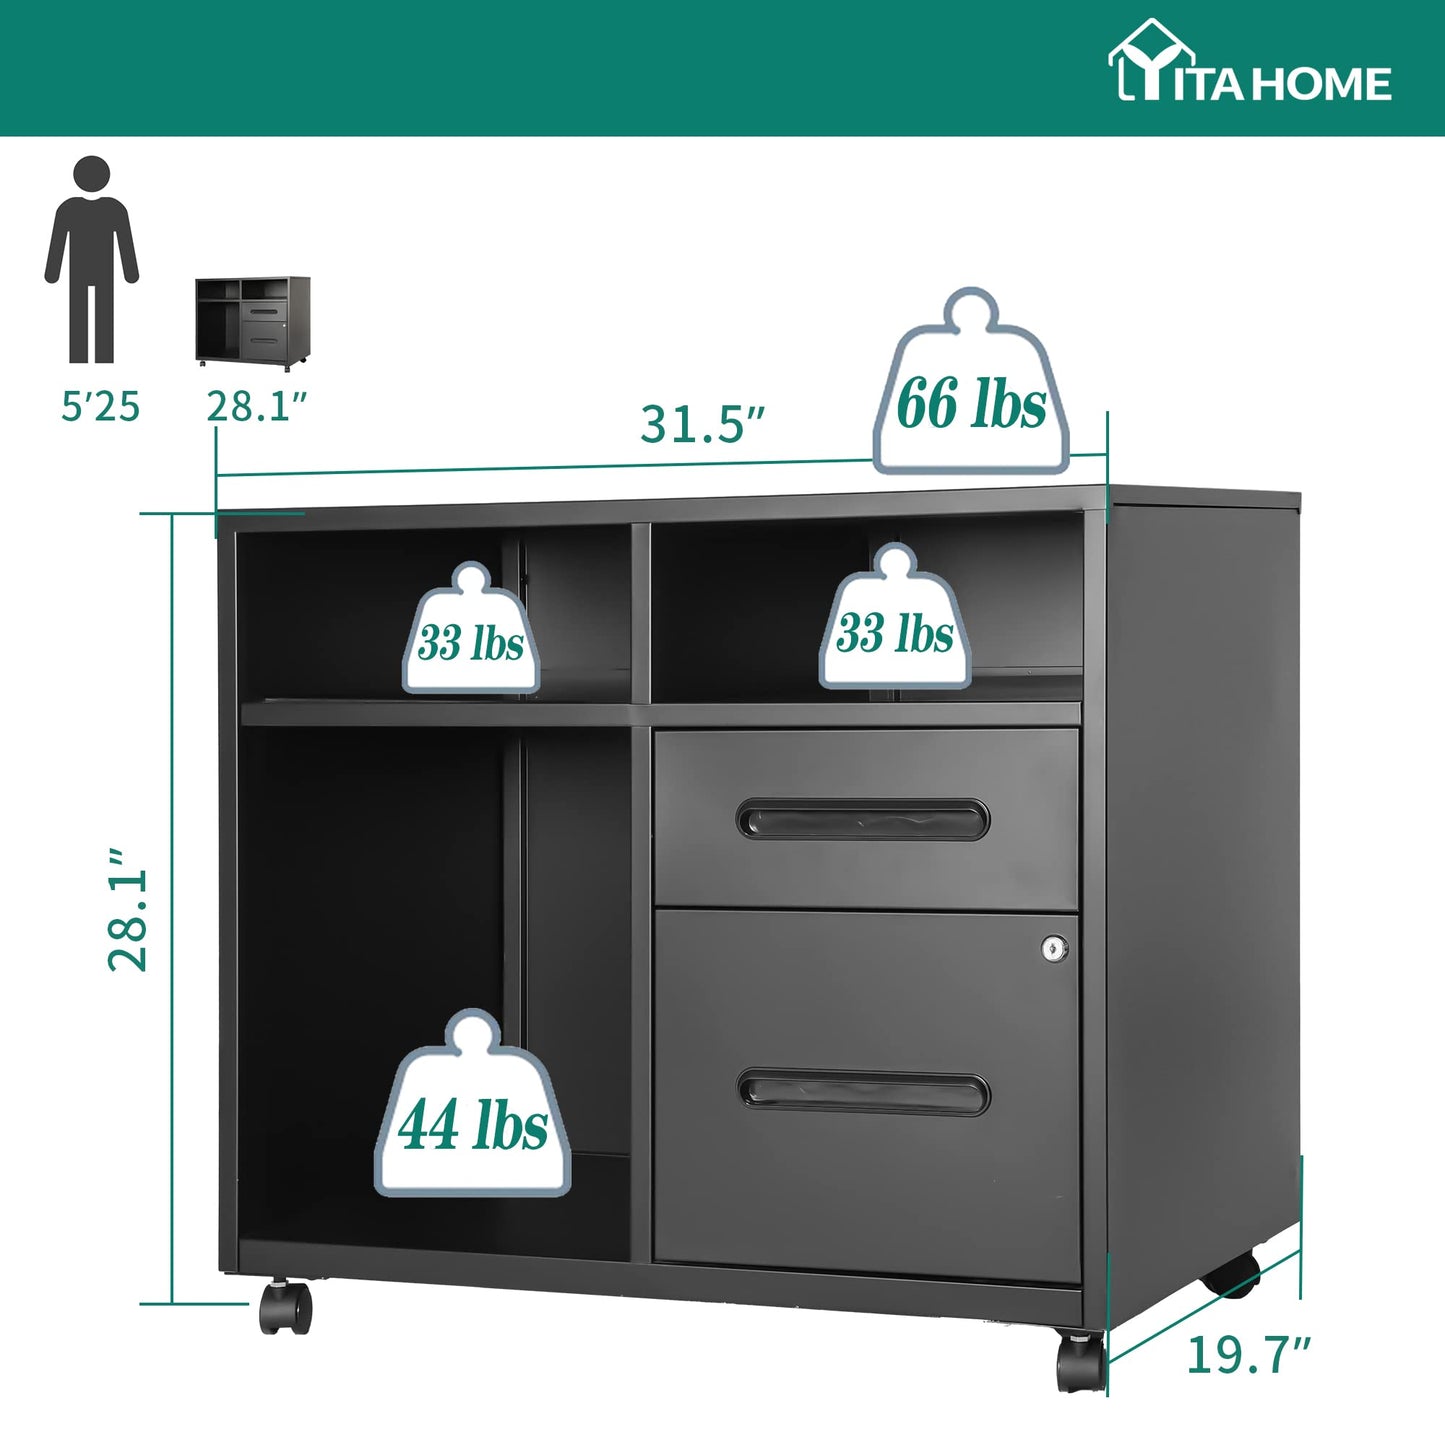 YITAHOME 2-Drawer Filing Cabinet, Office Metal Stainless Steel Mobile Lateral Filing Cabinet On Wheels, Printer Stand with Open Storage Shelves for